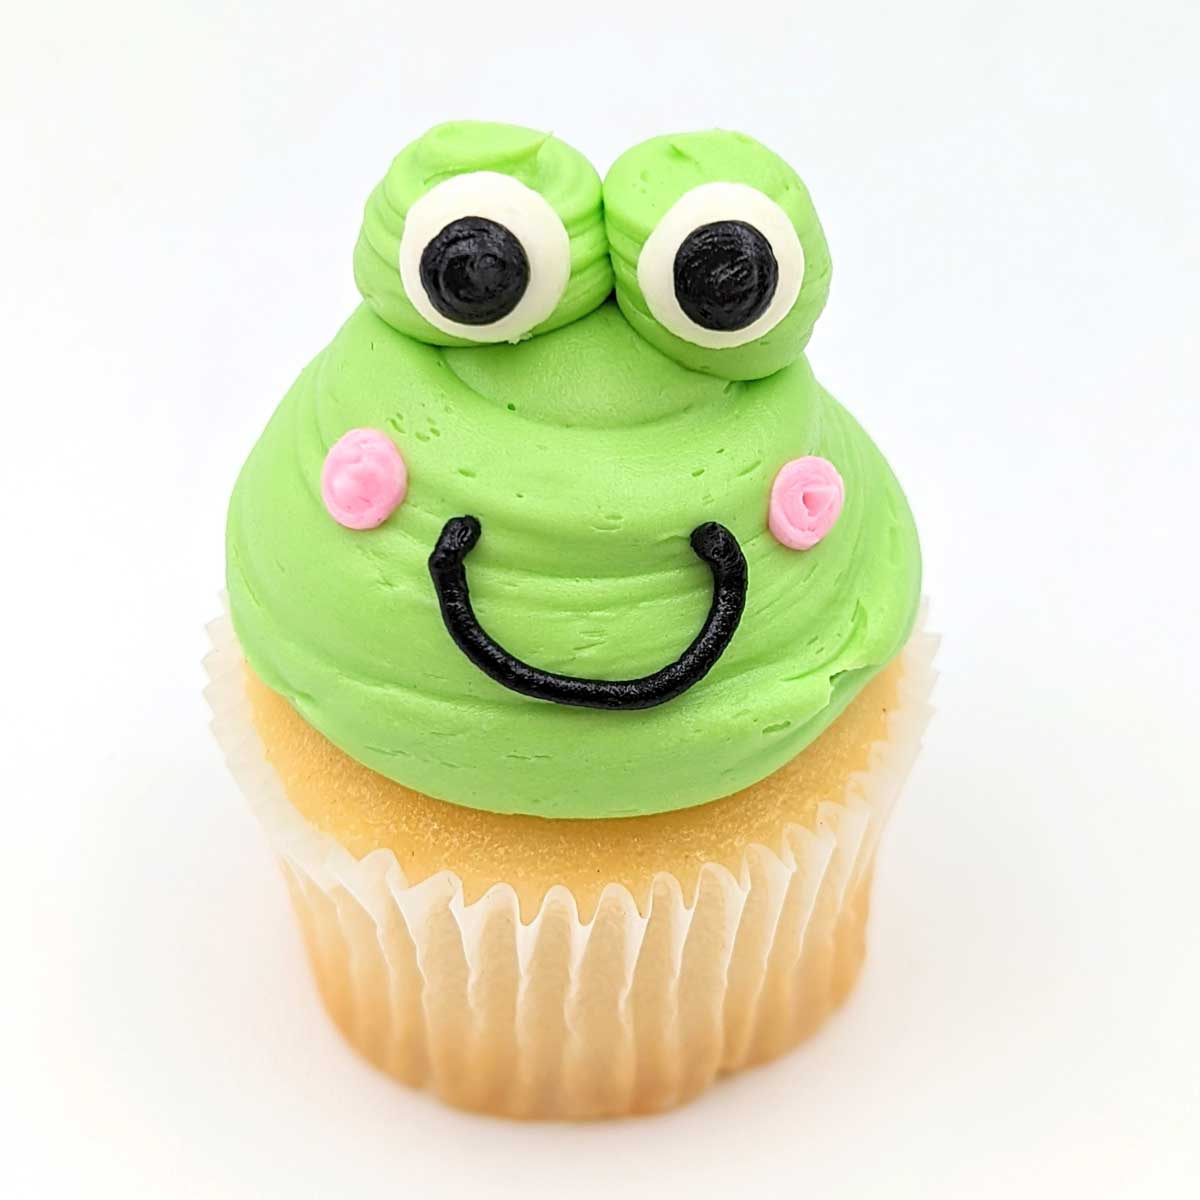 Birthday Cakes - Reptiles, Dinosaurs, and Frogs